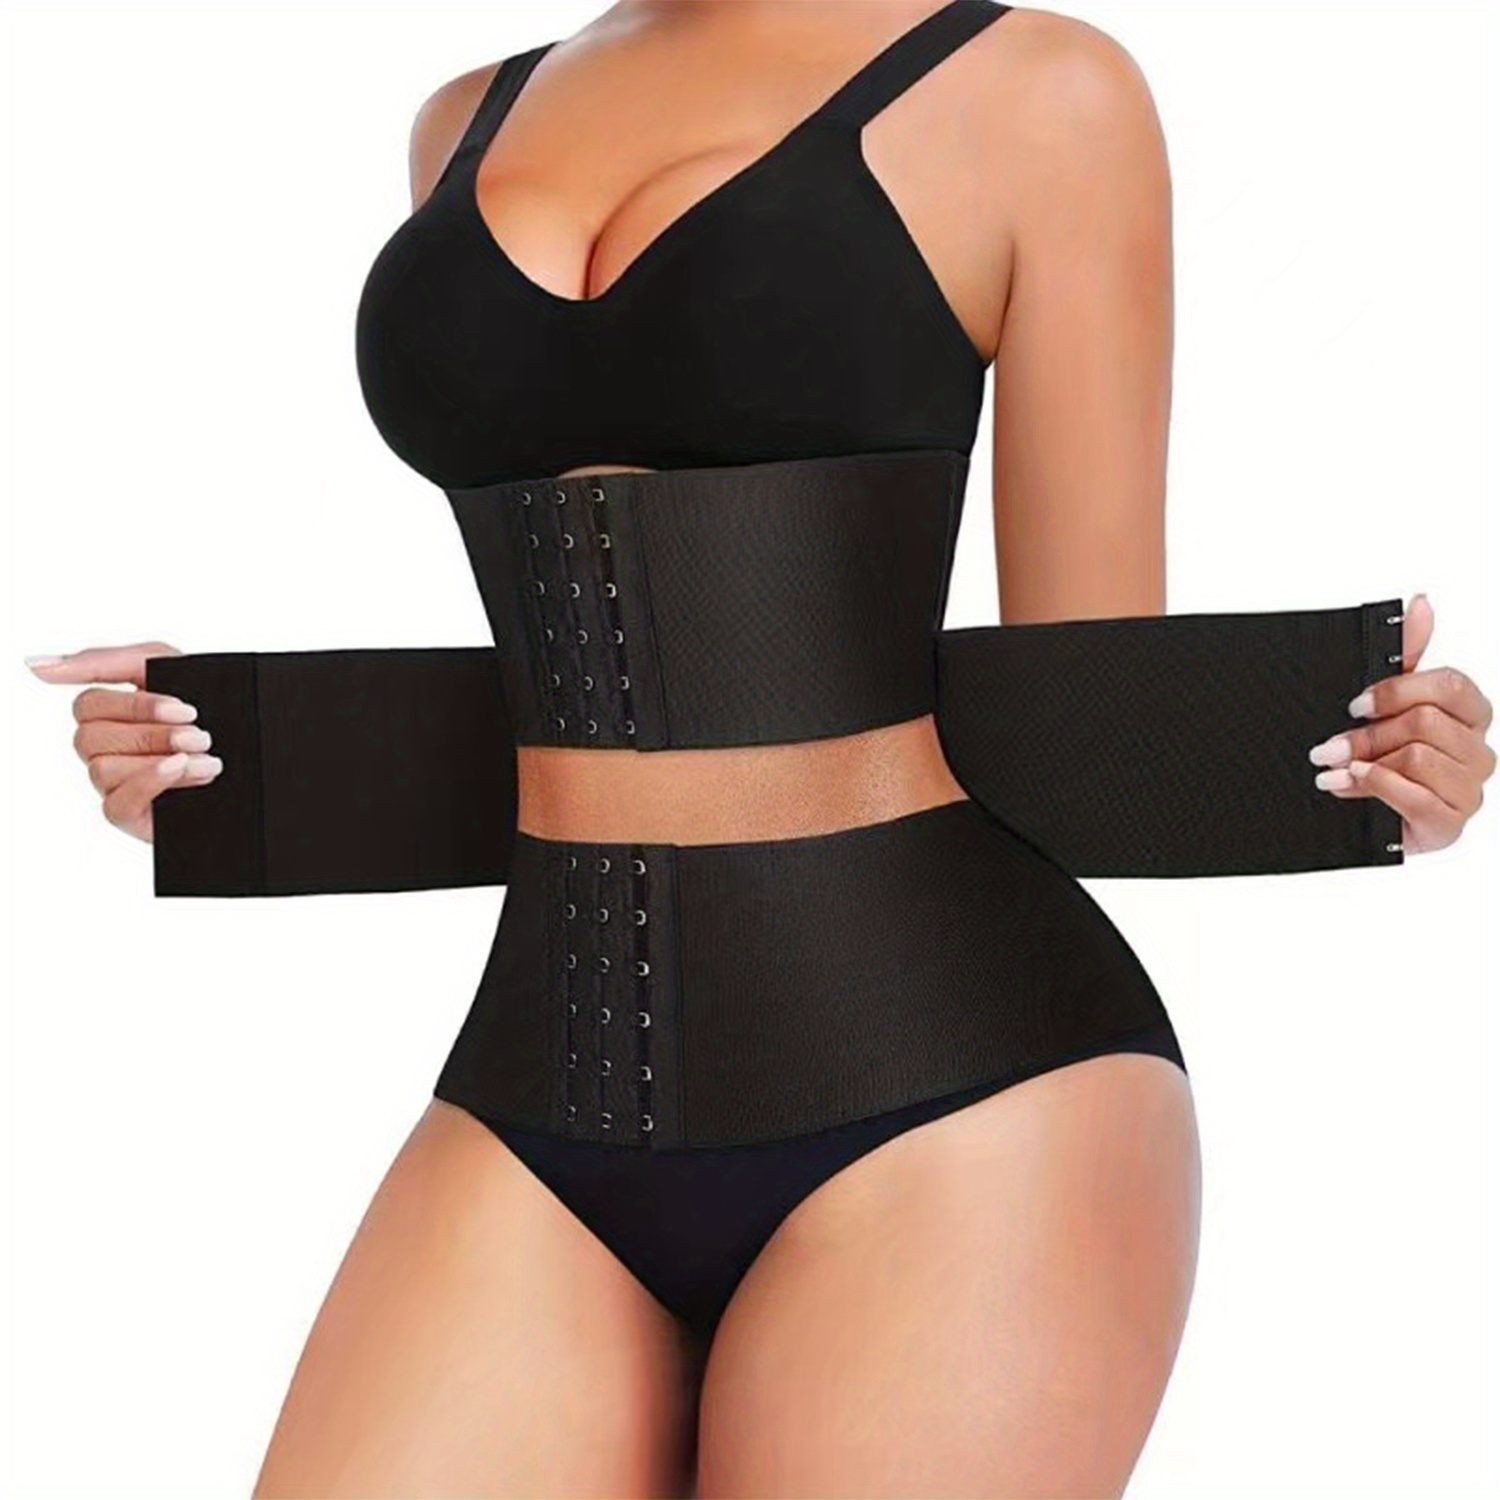 3 Meter Waist Trainer for Women Lower Belly Fat,Waist Wraps for Stomach, Belly Band for